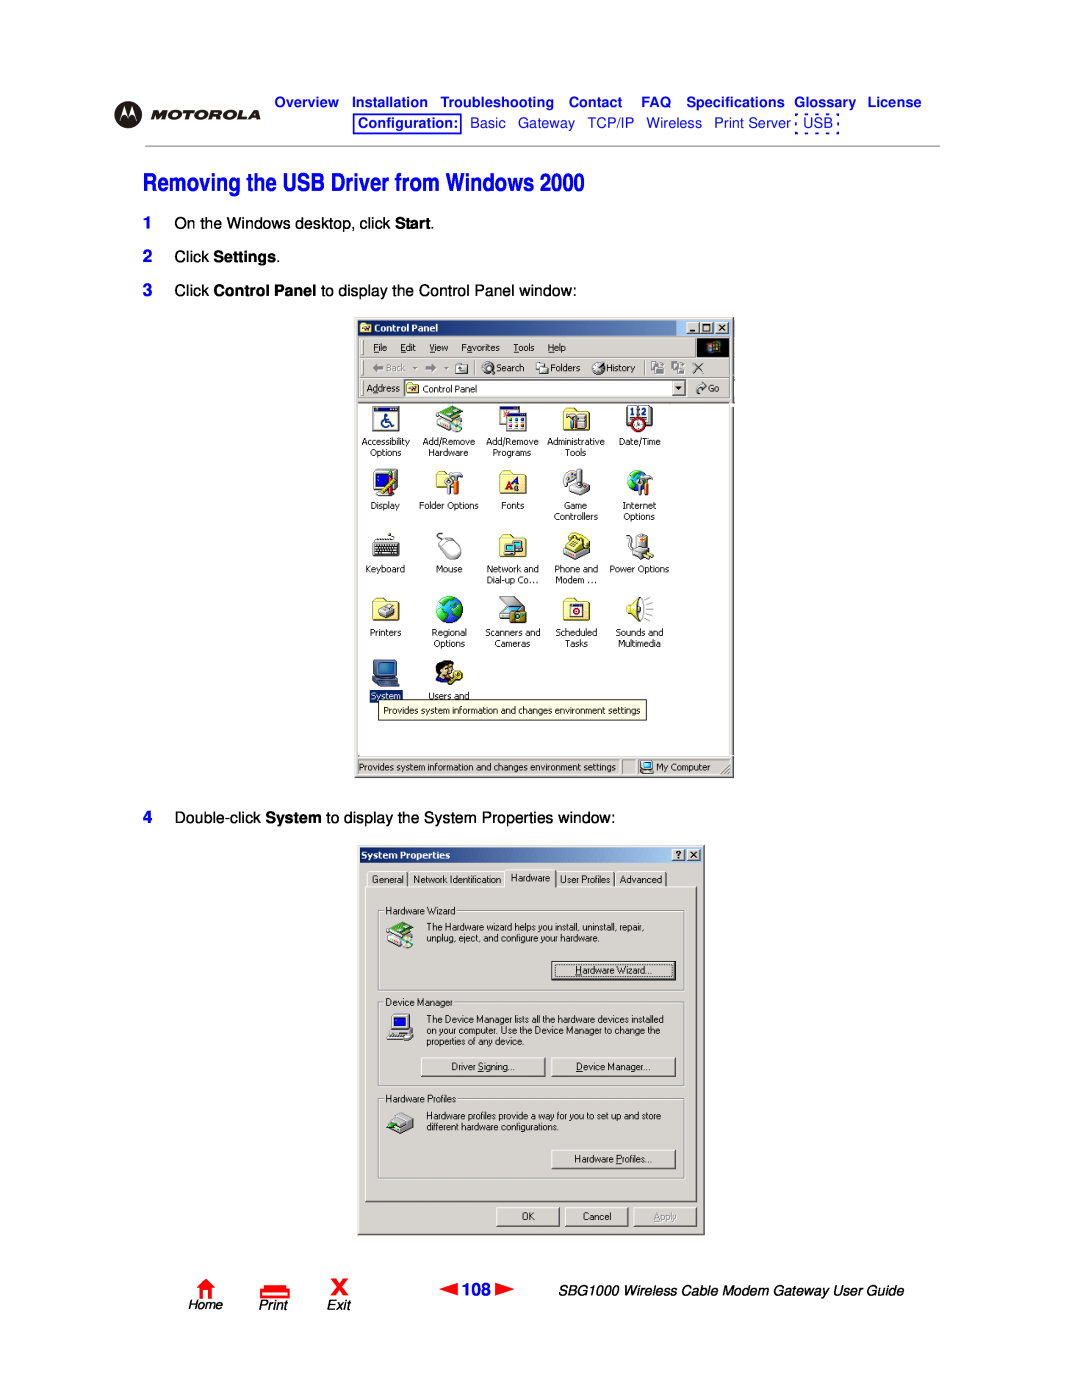 Motorola SBG1000 manual Removing the USB Driver from Windows, Click Settings, Home Print Exit 